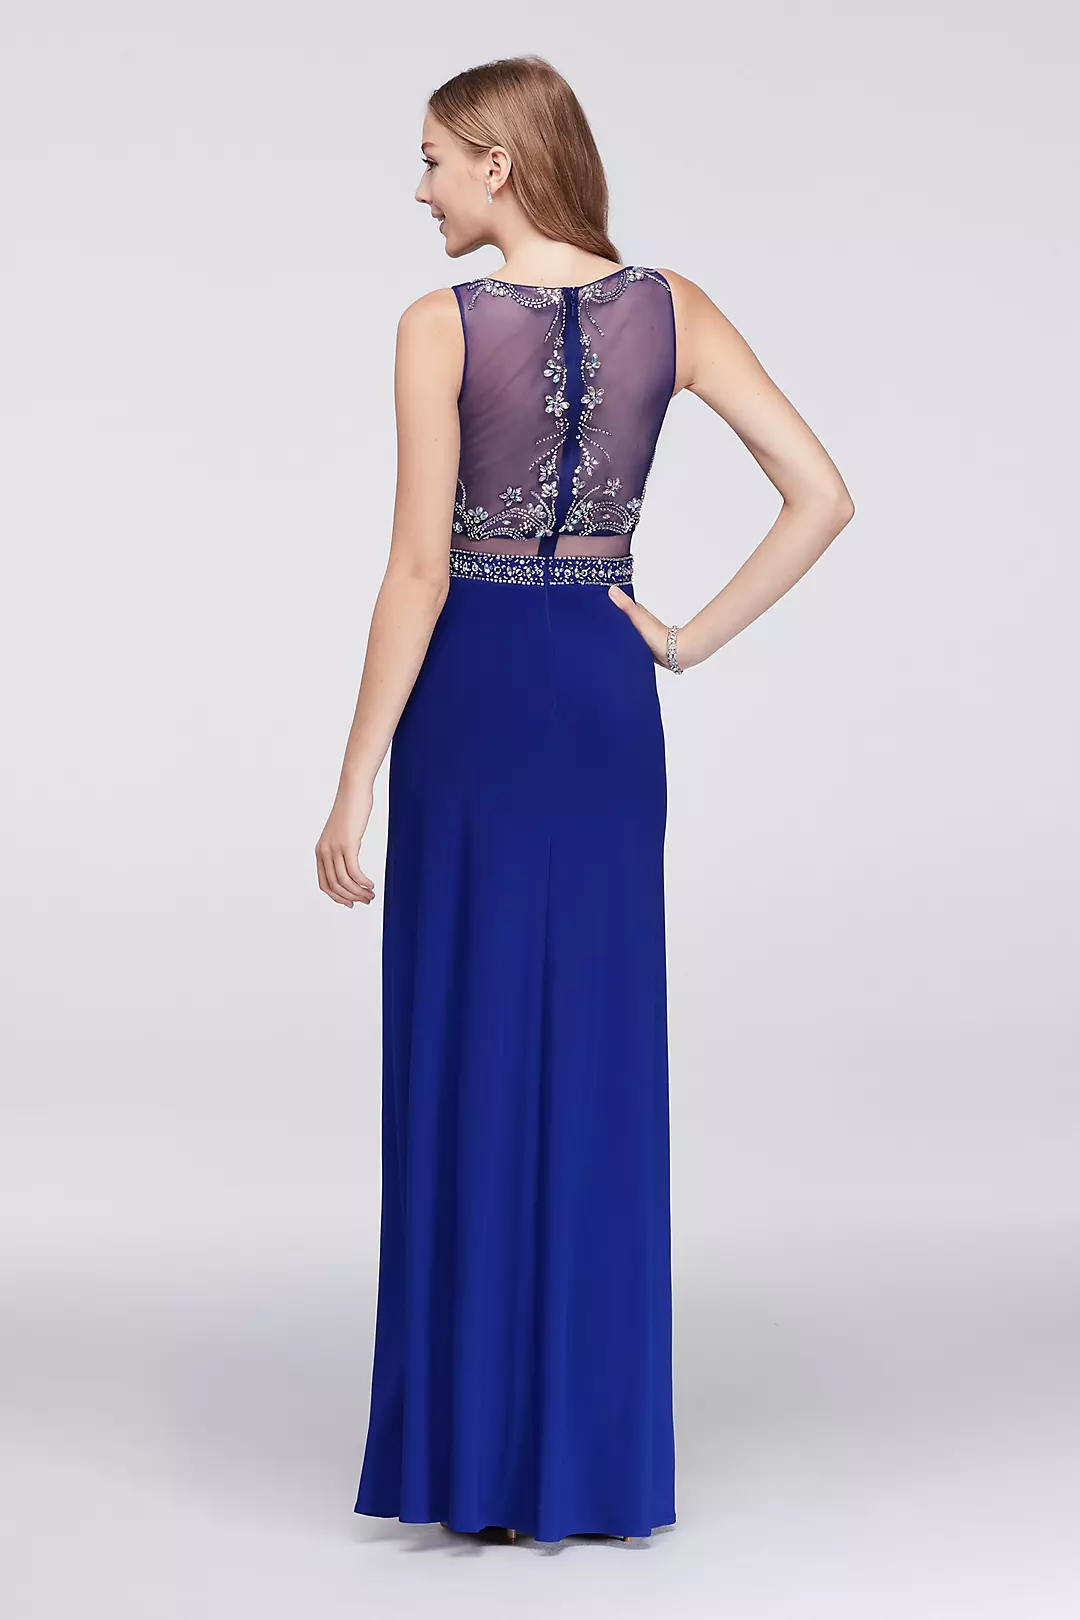 Beaded Faux Two-Piece Dress with Illusion Back Image 2